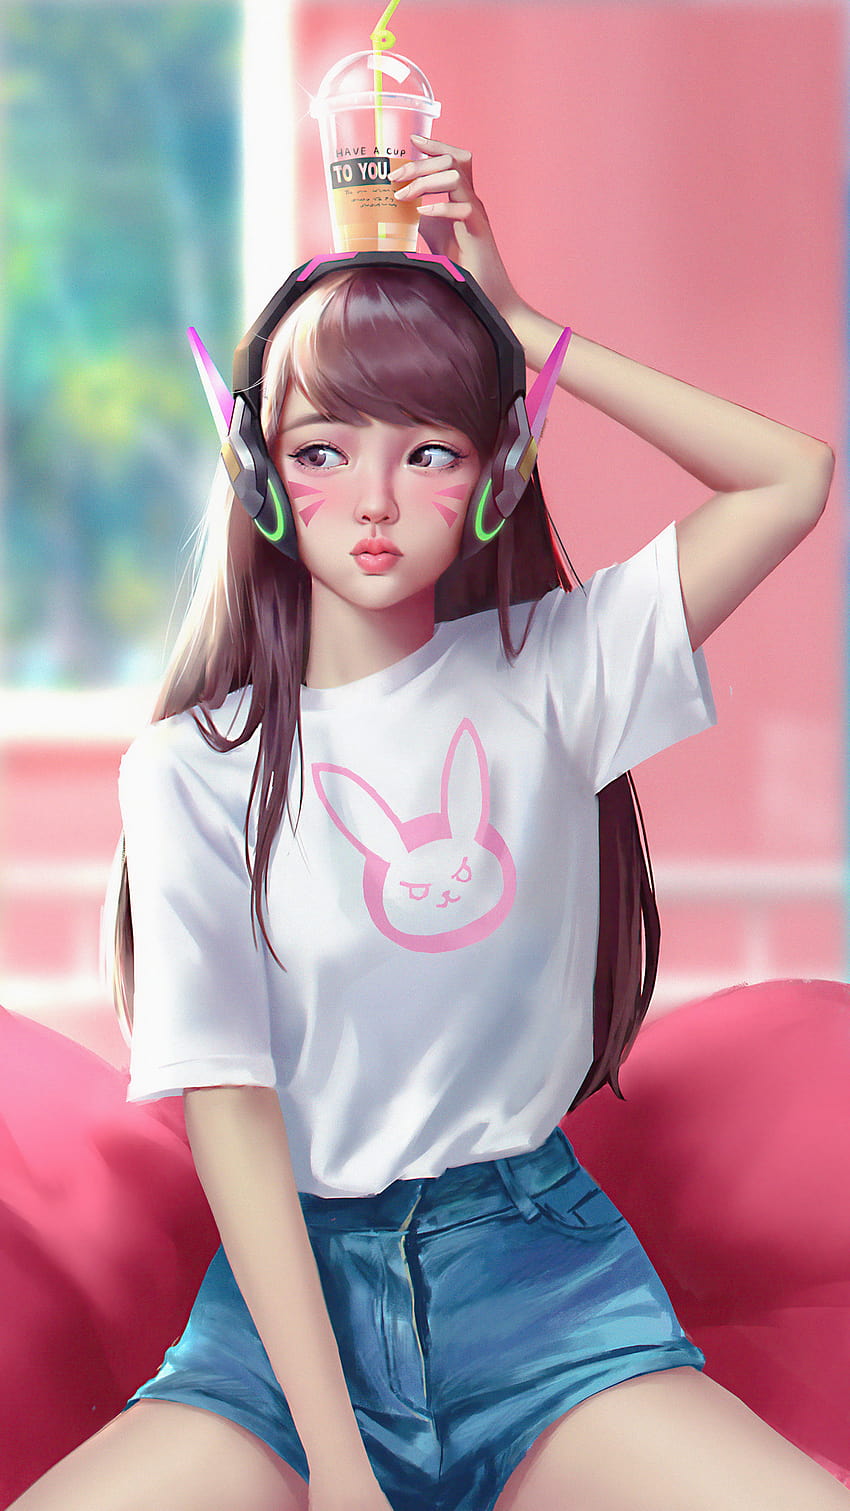 1080x1920 Summertime Over Dva オーバーウォッチ Iphone 7,6s,6 Plus, Pixel xl ,One Plus 3,3t,5 , Backgrounds, and HD電話の壁紙